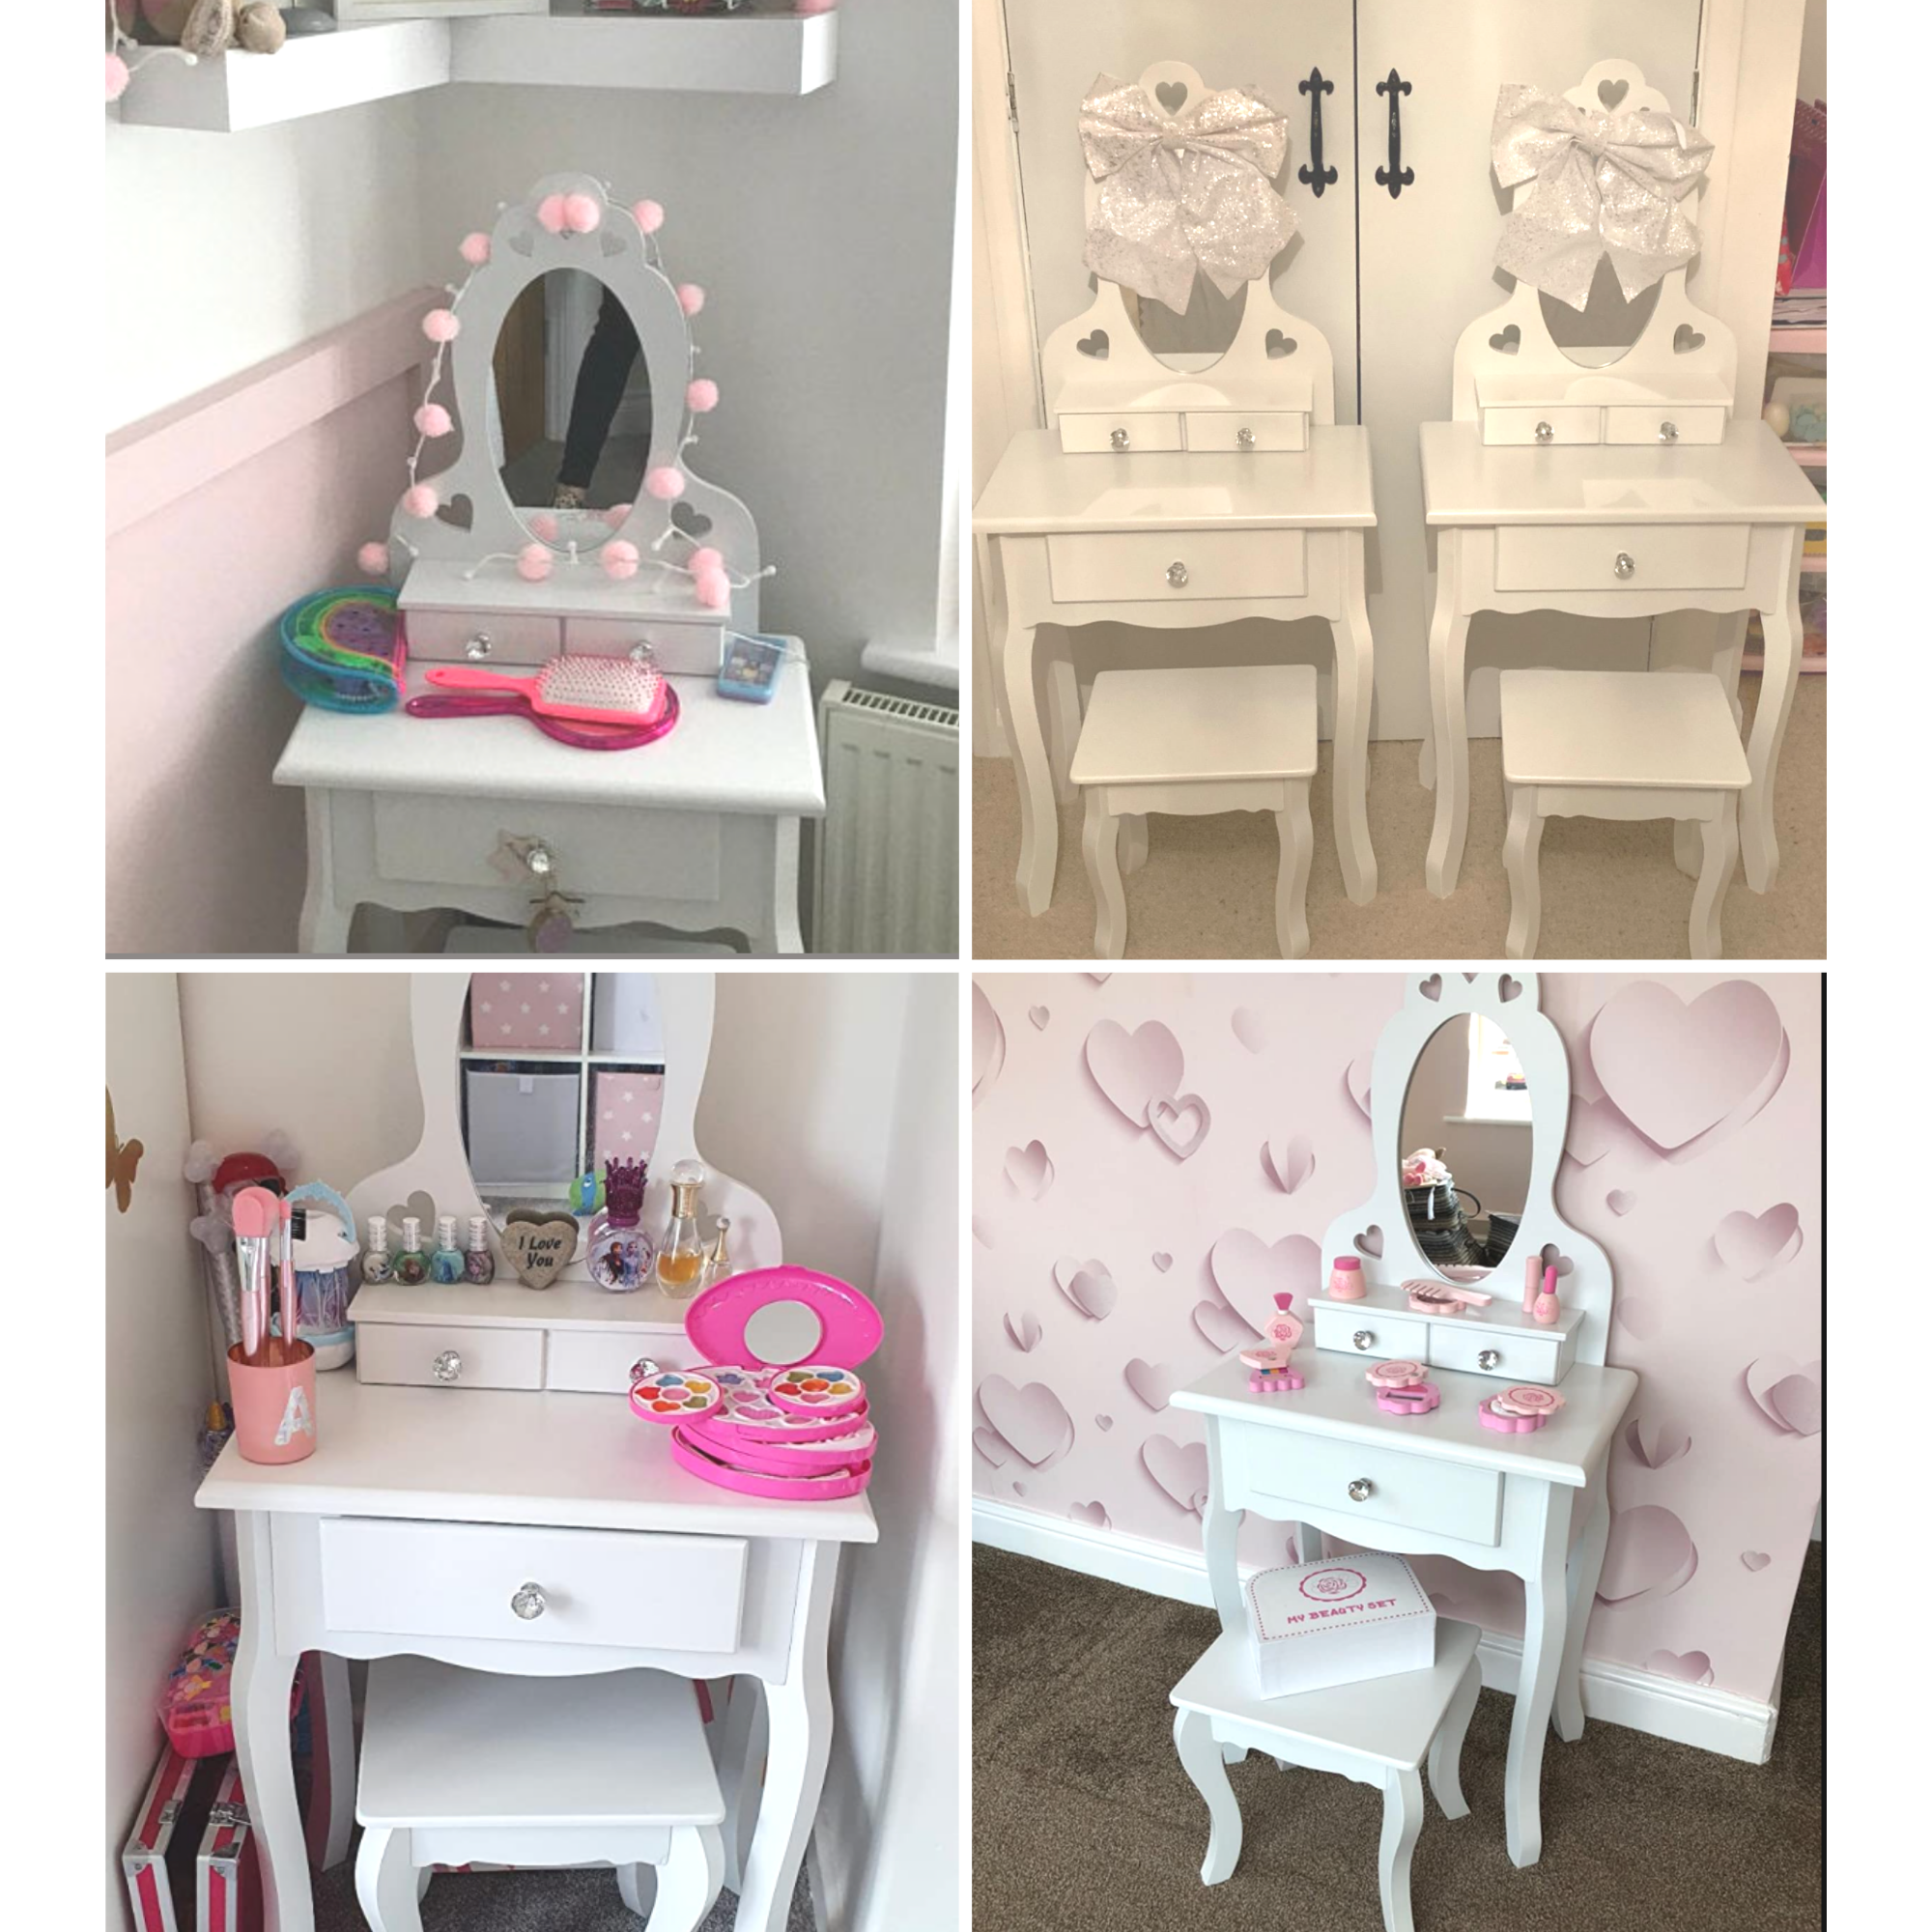 RuneSol Girls Dressing Table (Age 3-7yrs) With Mirror and Stool